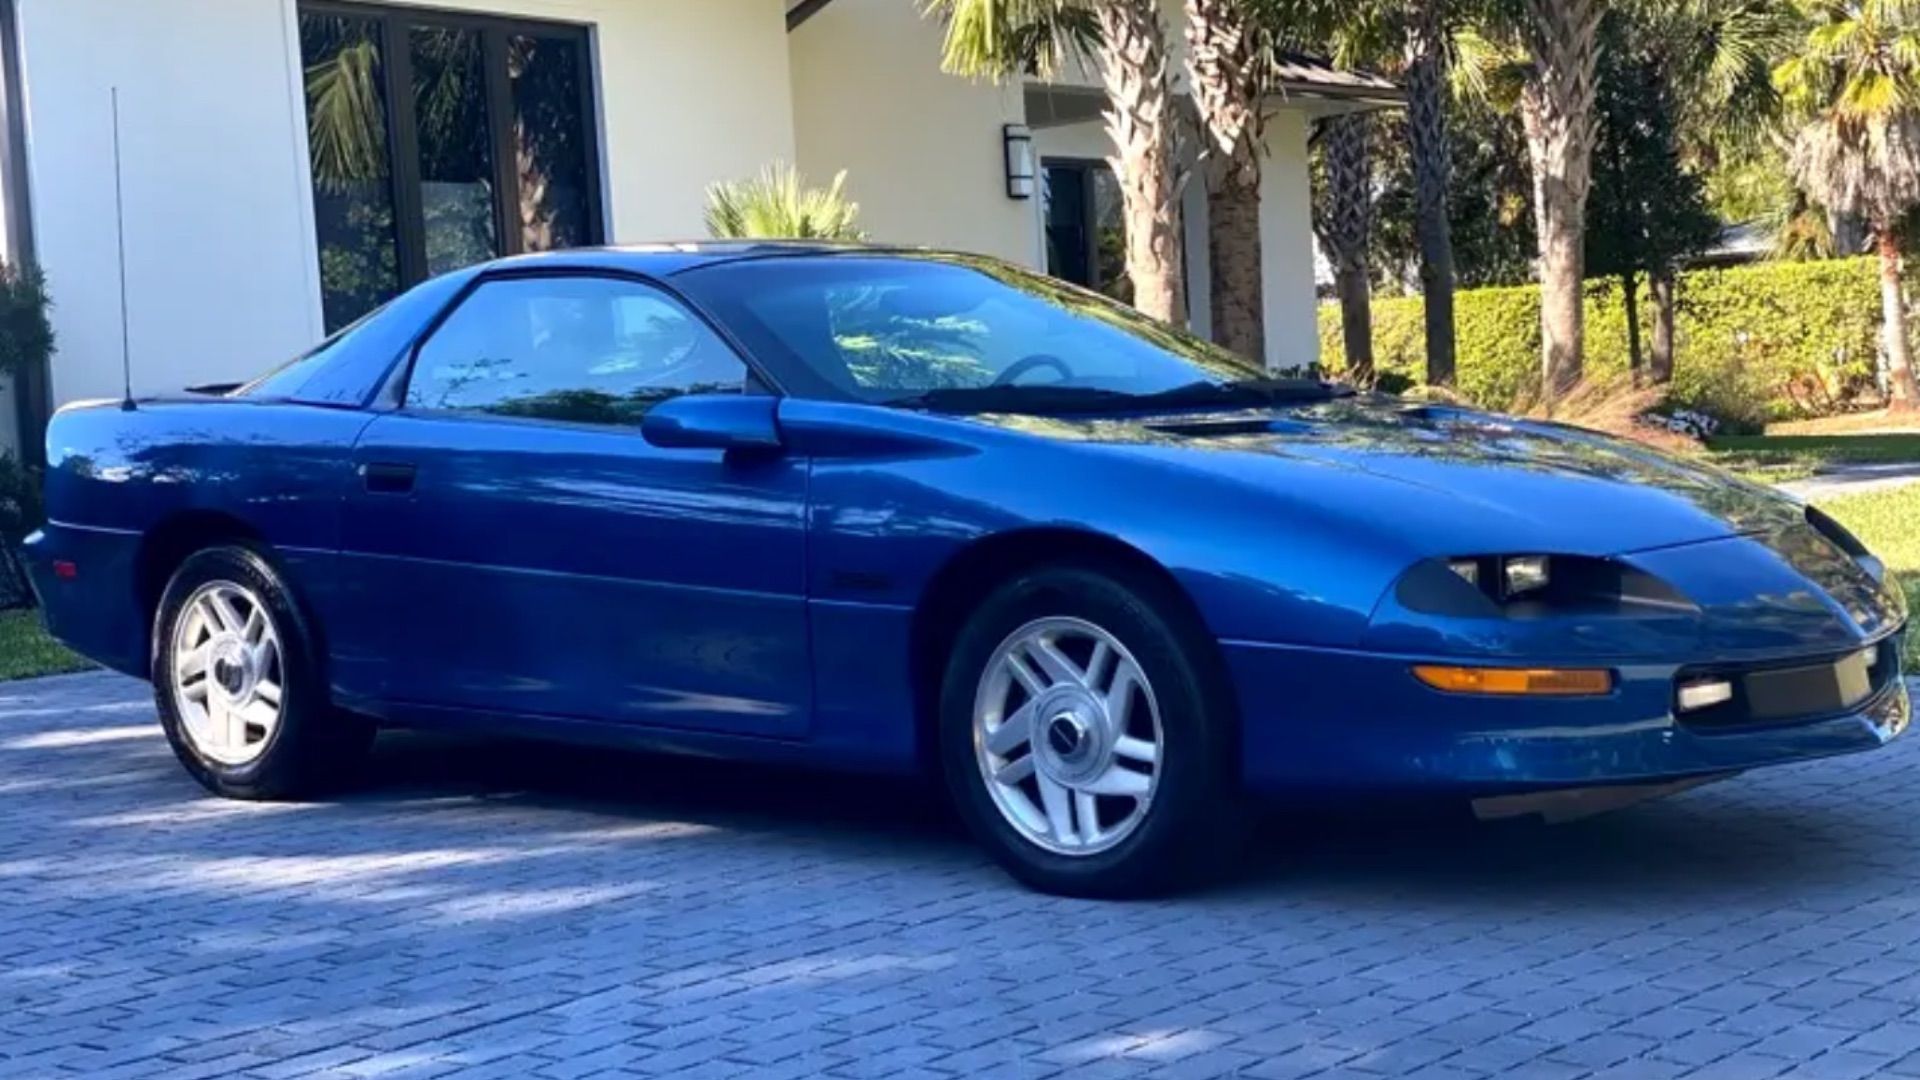 1995 Chevrolet Camaro Z28 Coupe Is Ready To Be Driven